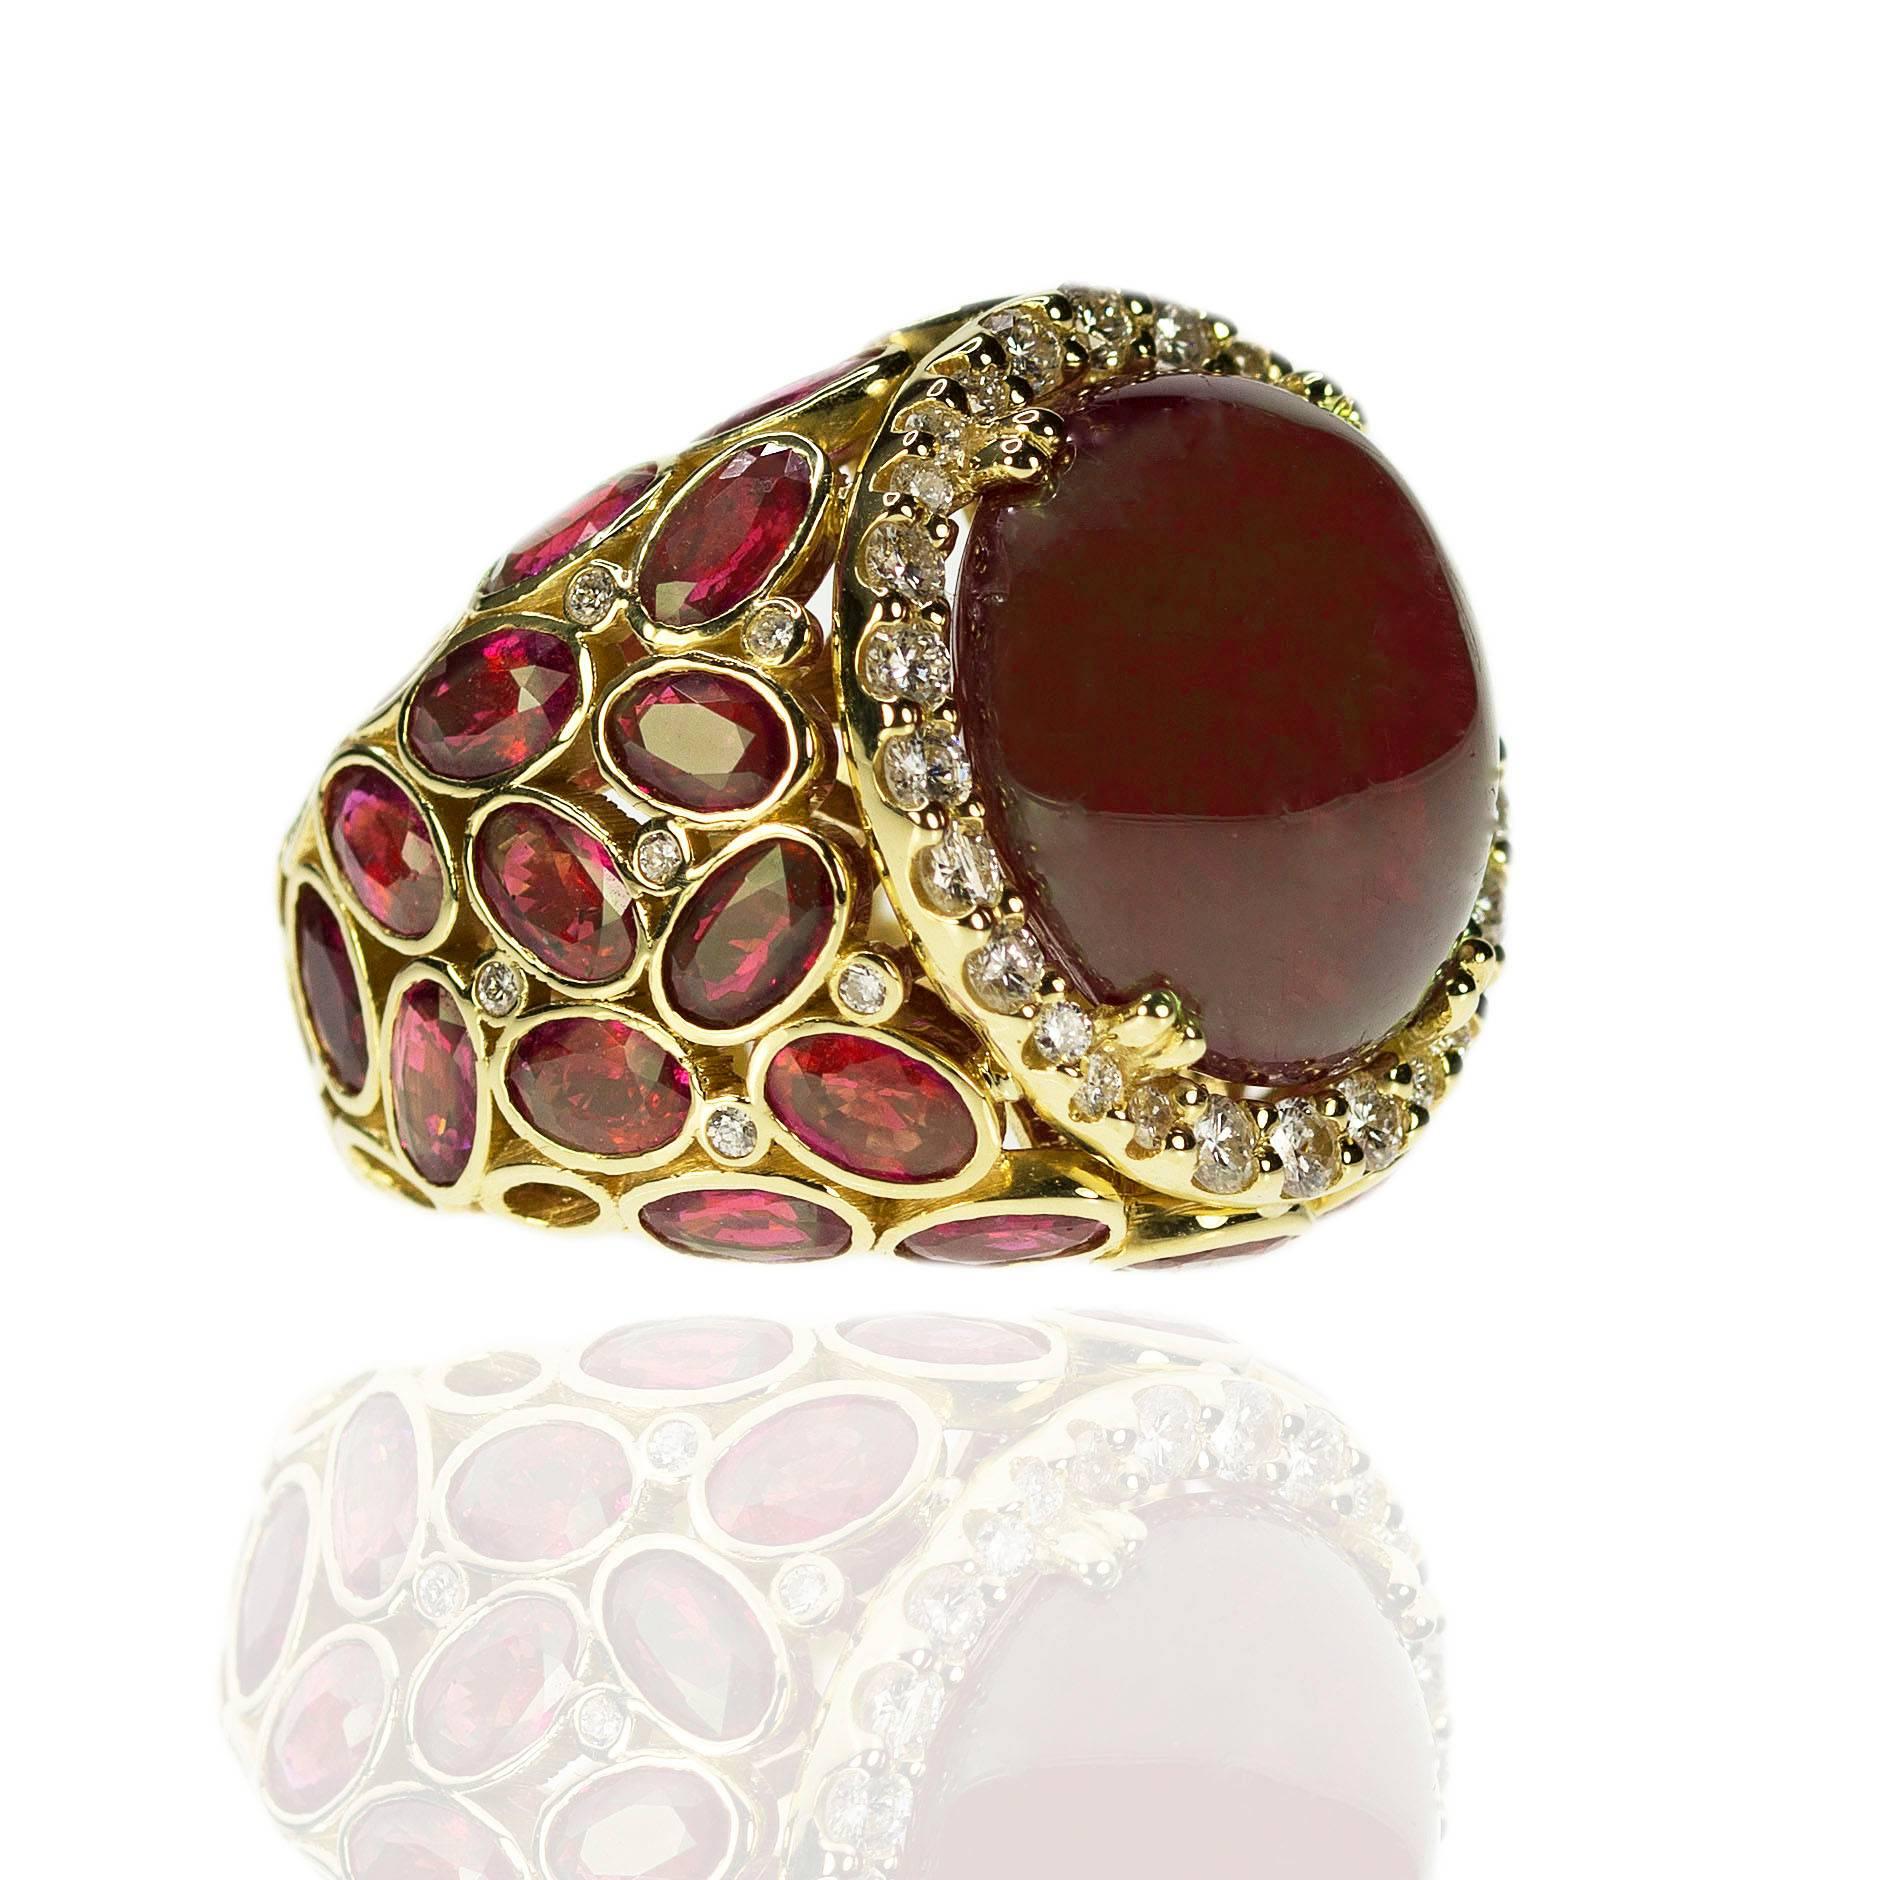 18k Ring with AGL certified 21.43 carat, cabochon cut, no heat Burma Ruby and 30 oval rubies weighing 8.27 carats and 40 round brilliant diamonds weighing 0.87 carats. 19.59gGold 